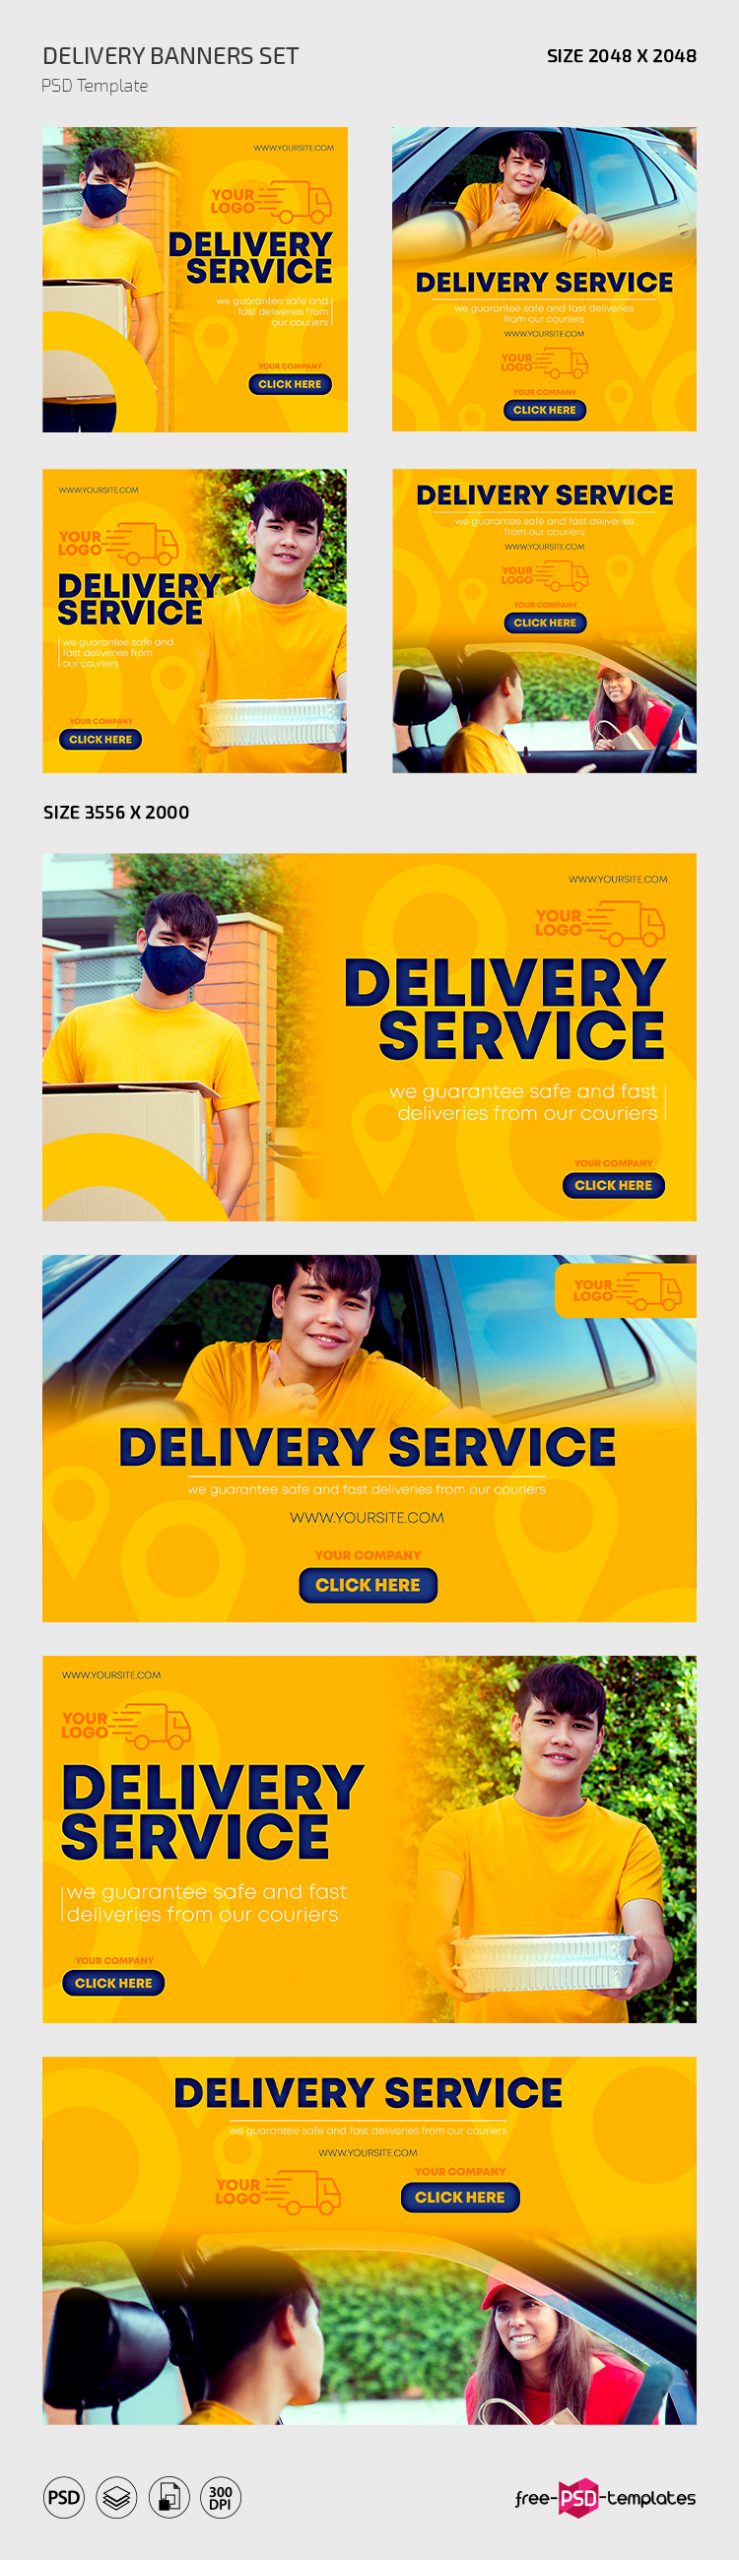 Free Delivery Banners Set in PSD